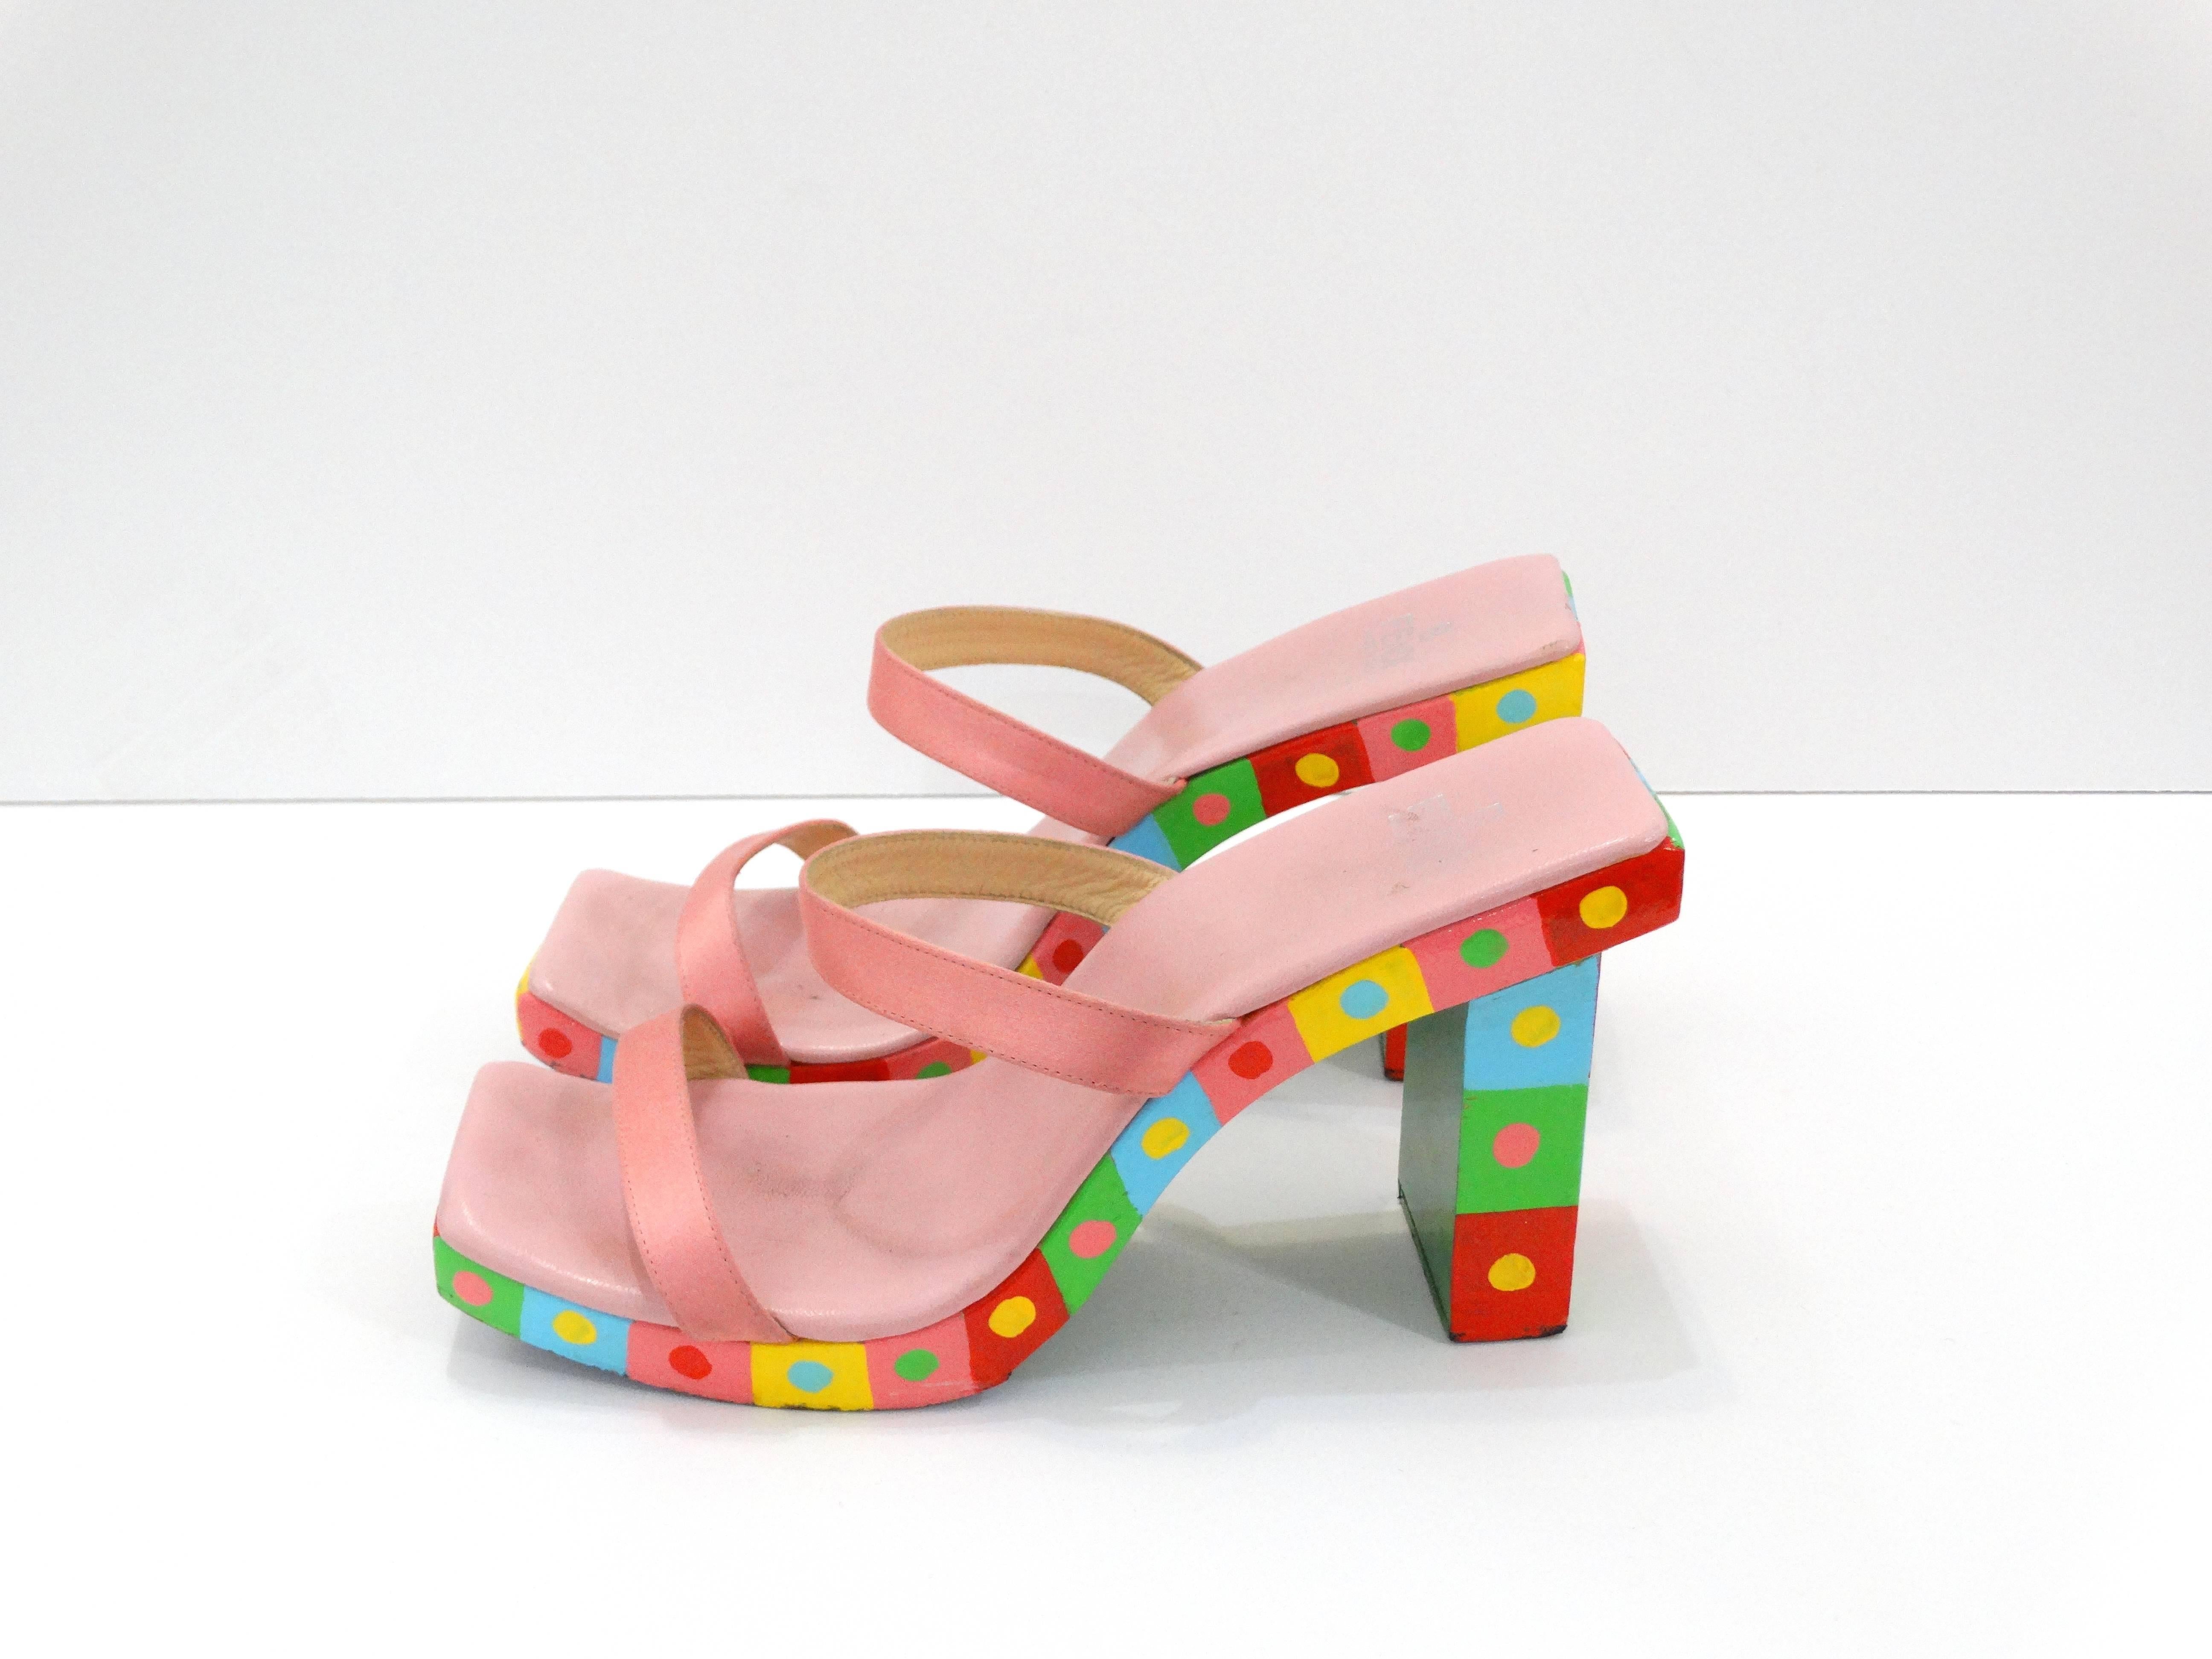 The most amazing pair of 1990s Fendi Sandals! Wooden block heel painted in multicolored checkers and dots! Lacquered finish. Pink satin double strap. Very light wear, some grey discoloration on the soles as pictured. Marked an 8 1/2. 